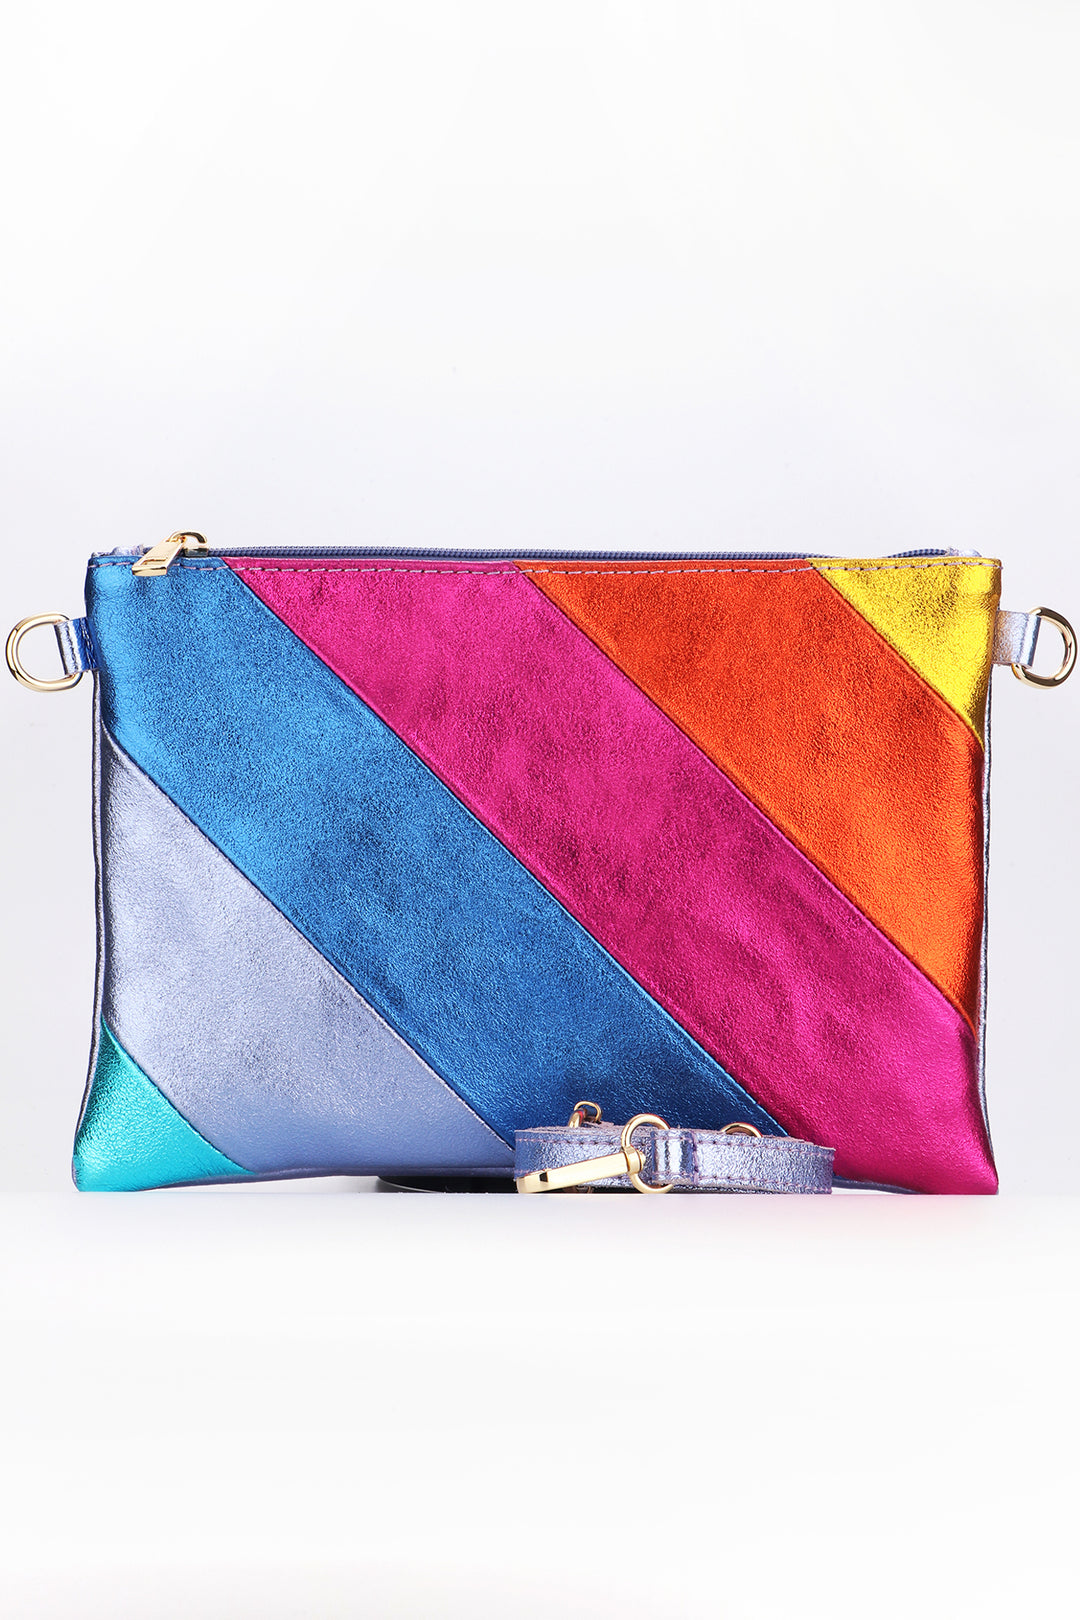 multicoloured rainbow striped leather clutch bag, stripes are yellow, orange, pink, blue, lilac and turquoise. the clutch bag has a detachable lilac leather wrist strap